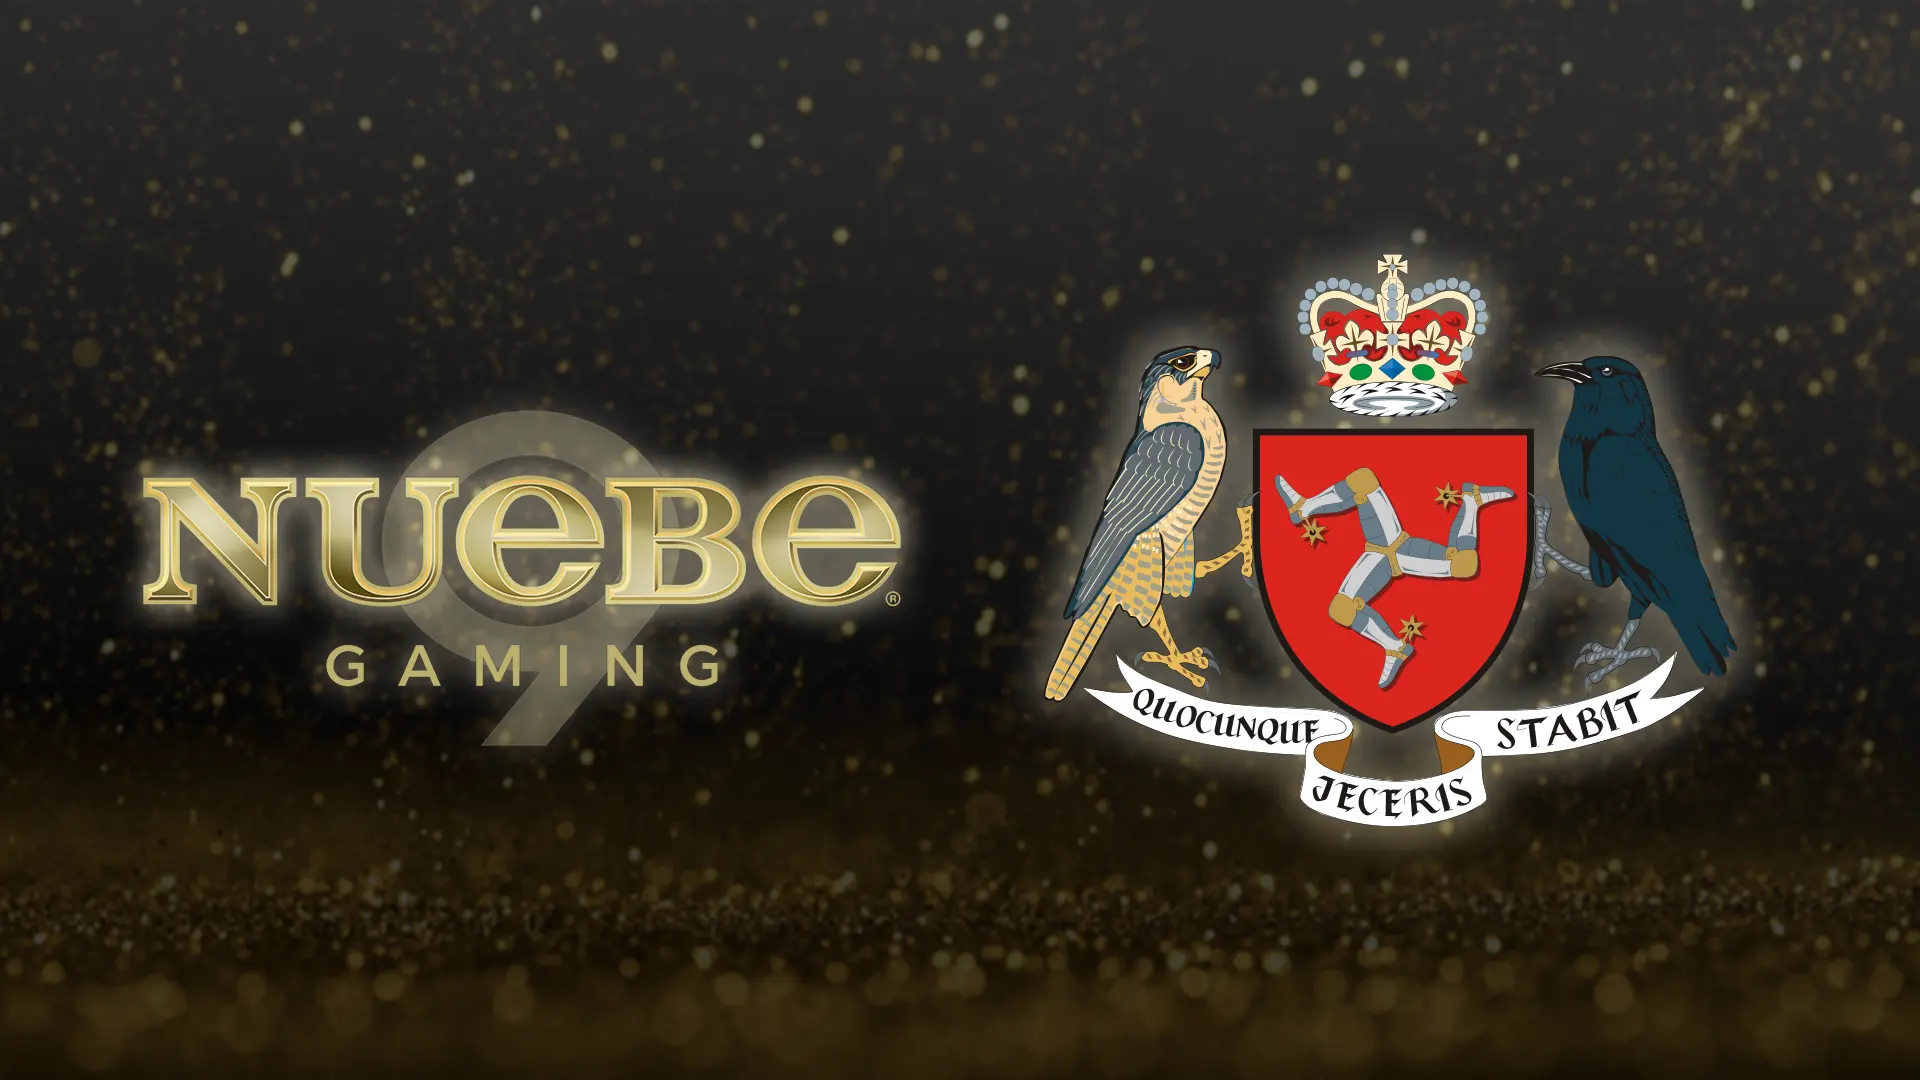 Official Nuebe Gaming logo alongside the Isle of Man Gambling Supervision Commission crest.